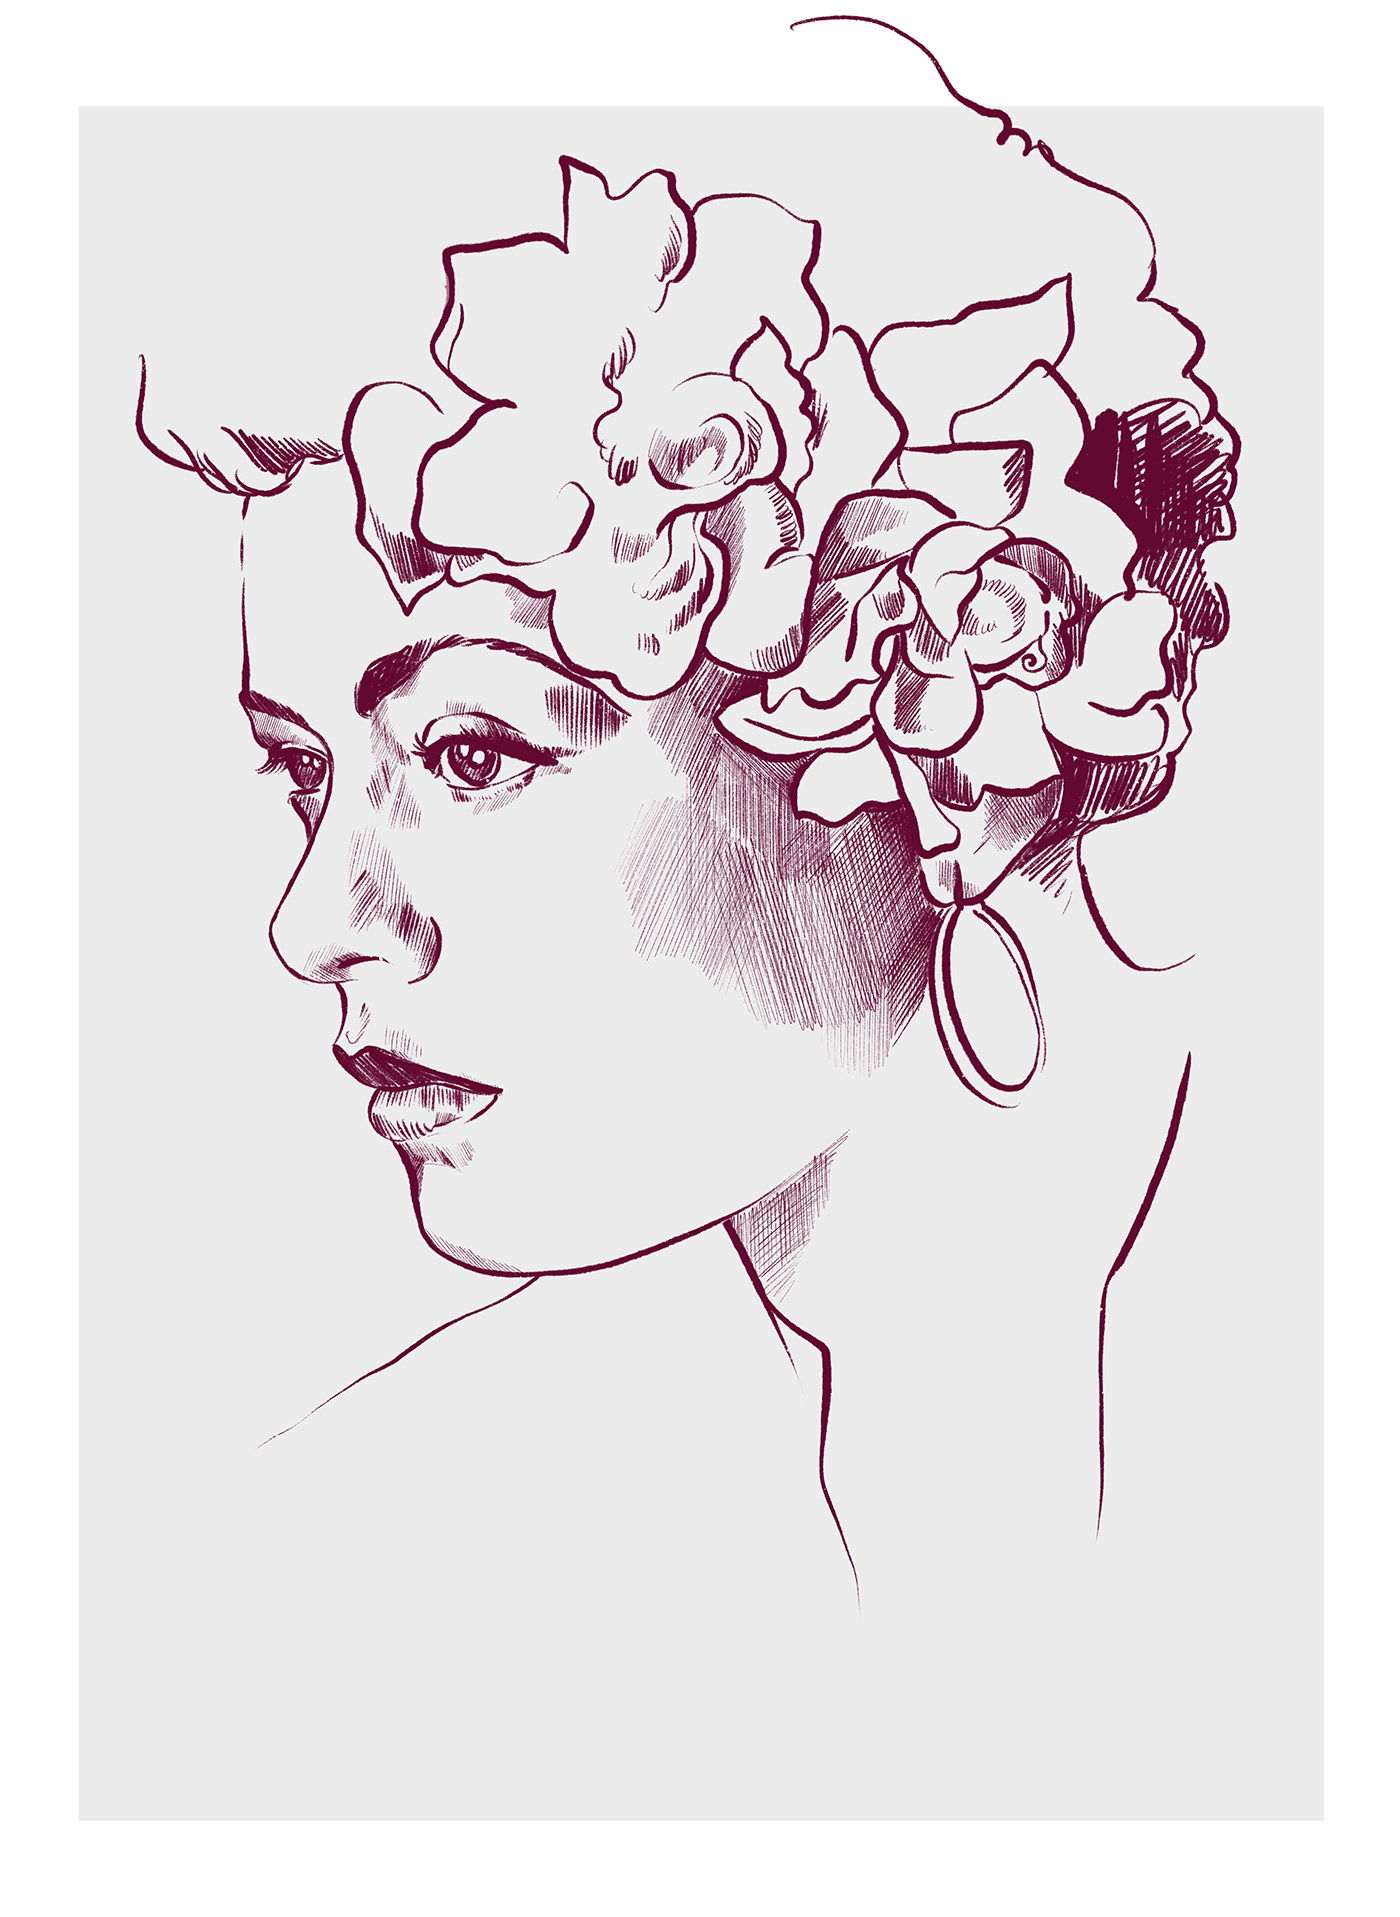 billie holiday woman jazz Singer blues strong empowerment lady day pen portrait Lady jazz woman Harlem